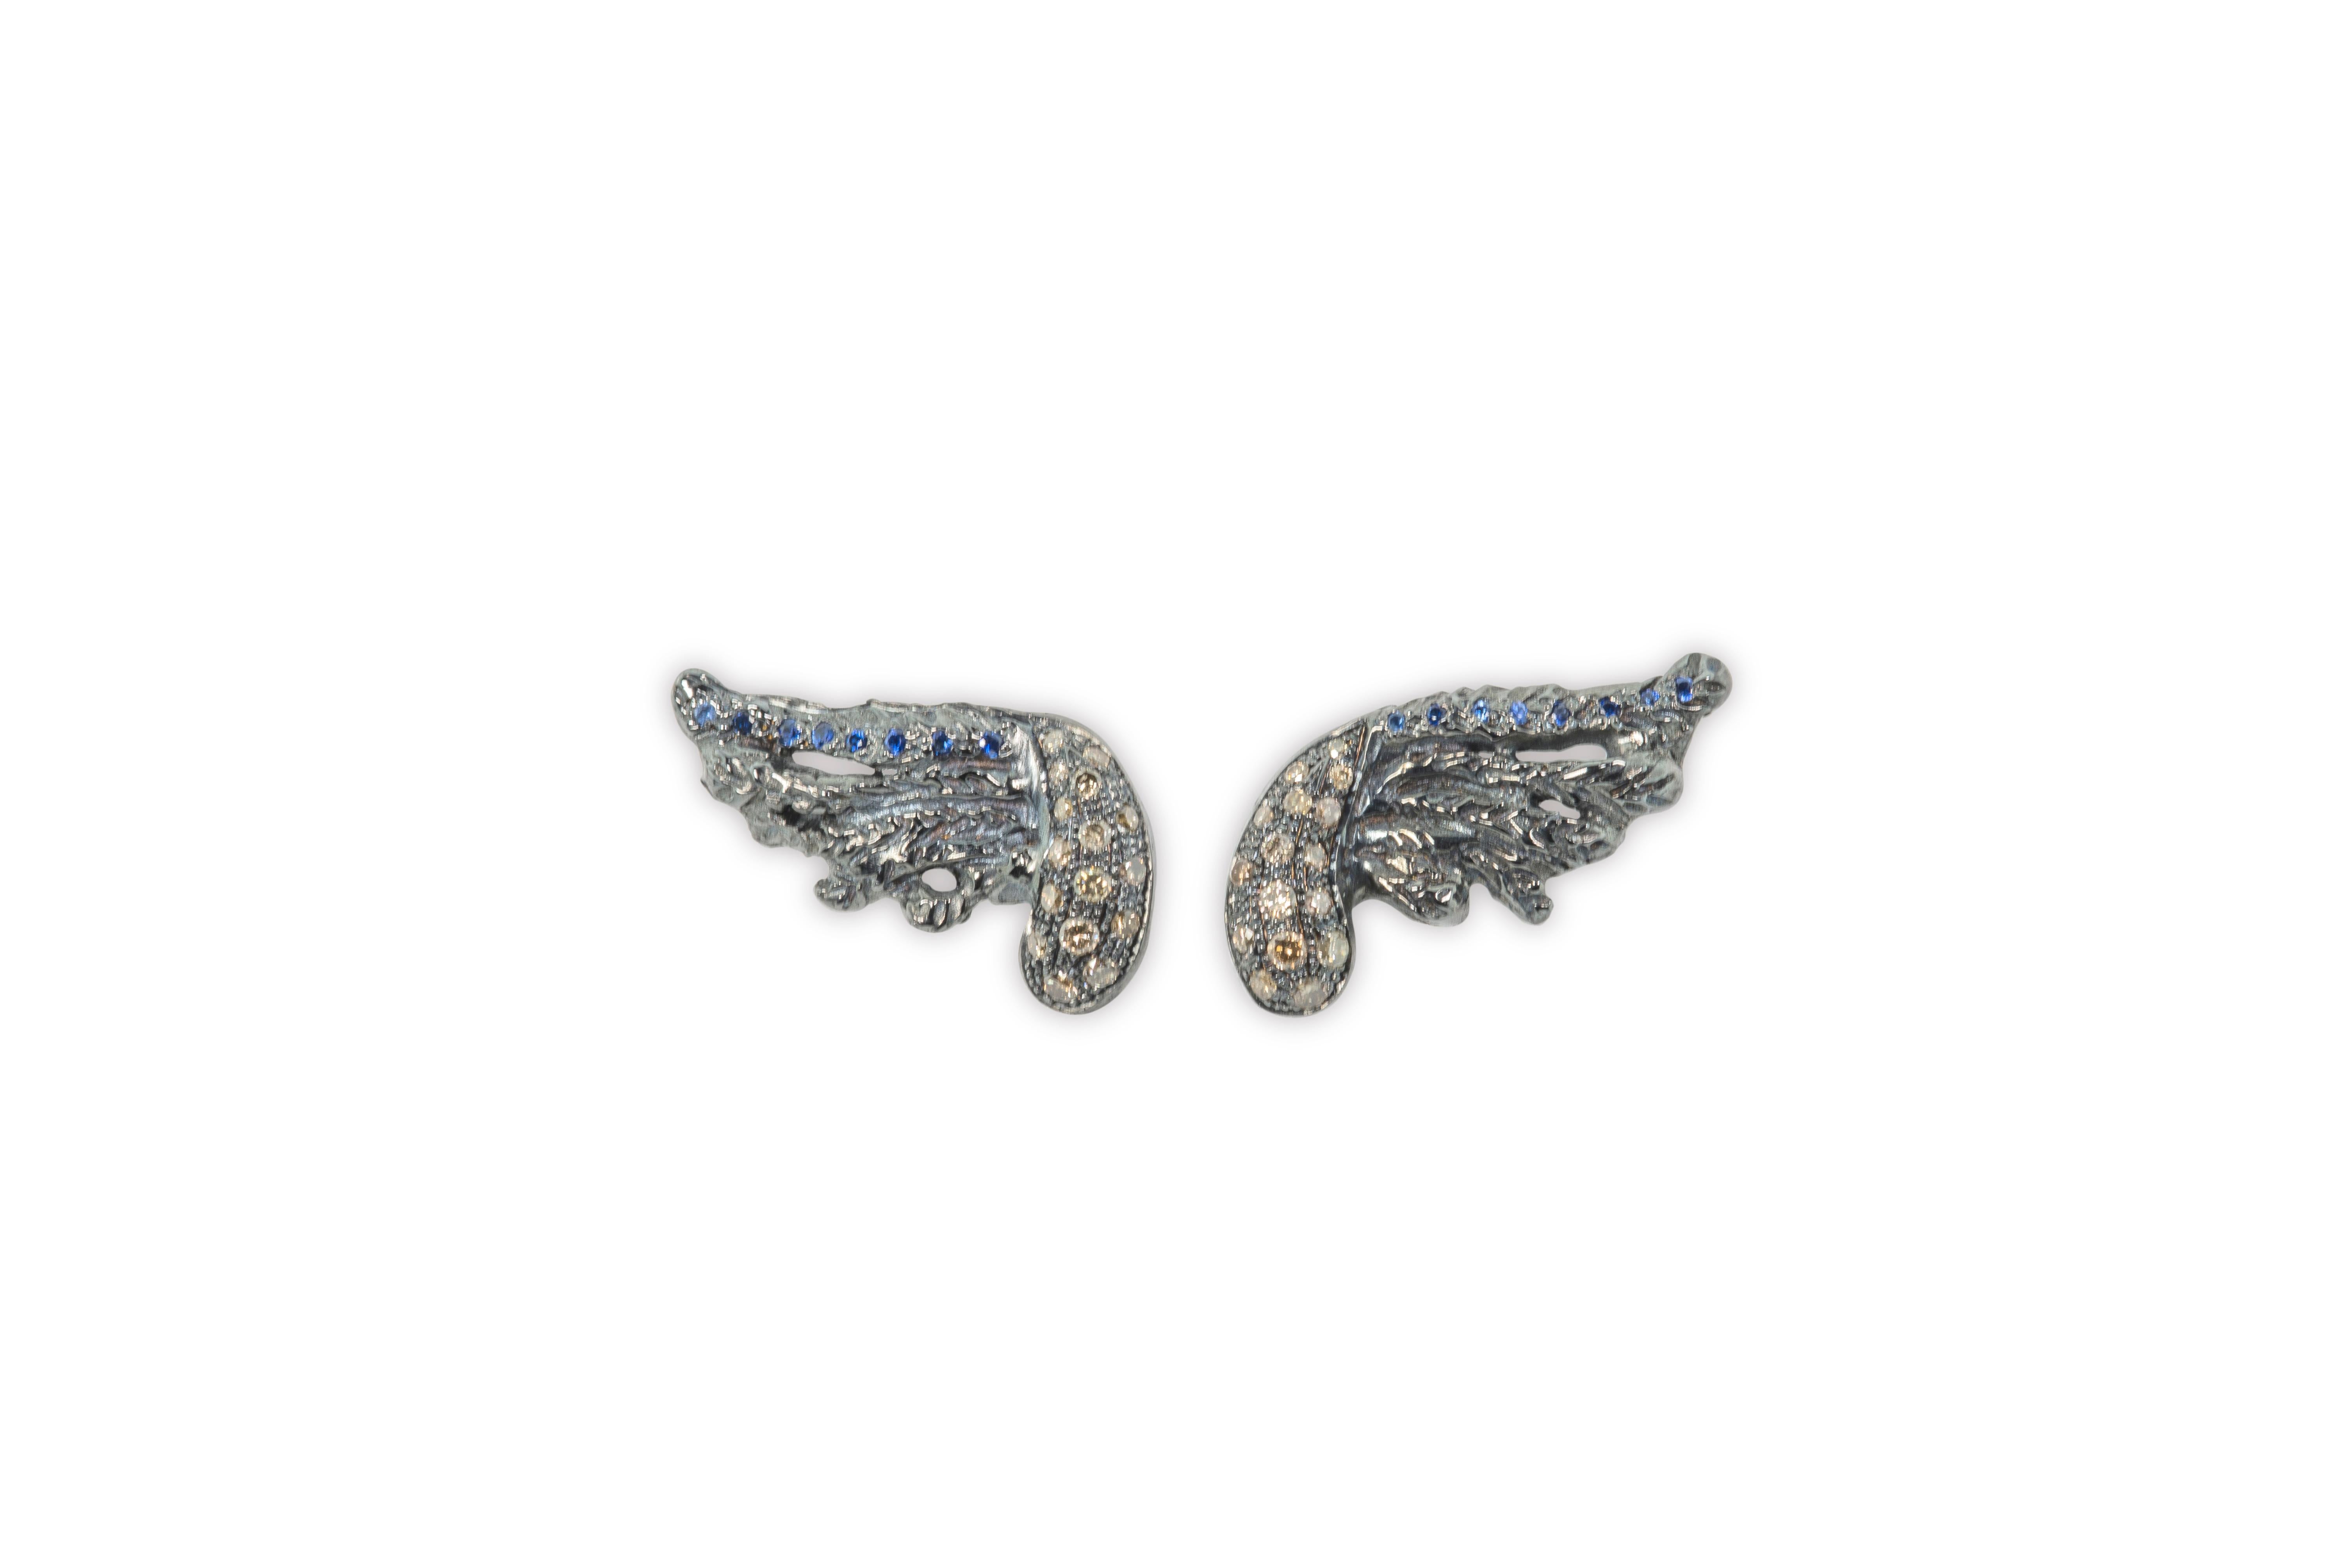 Artisan 18 kt White Gold 0.30 Karat Brown Diamonds Feather Blue Sapphires  Stud Earrings
Here there is a a beautiful pair of stud earrings handcrafted in 18 karats white gold and embellished with 0.30 karats brown diamonds and blue sapphires.
This